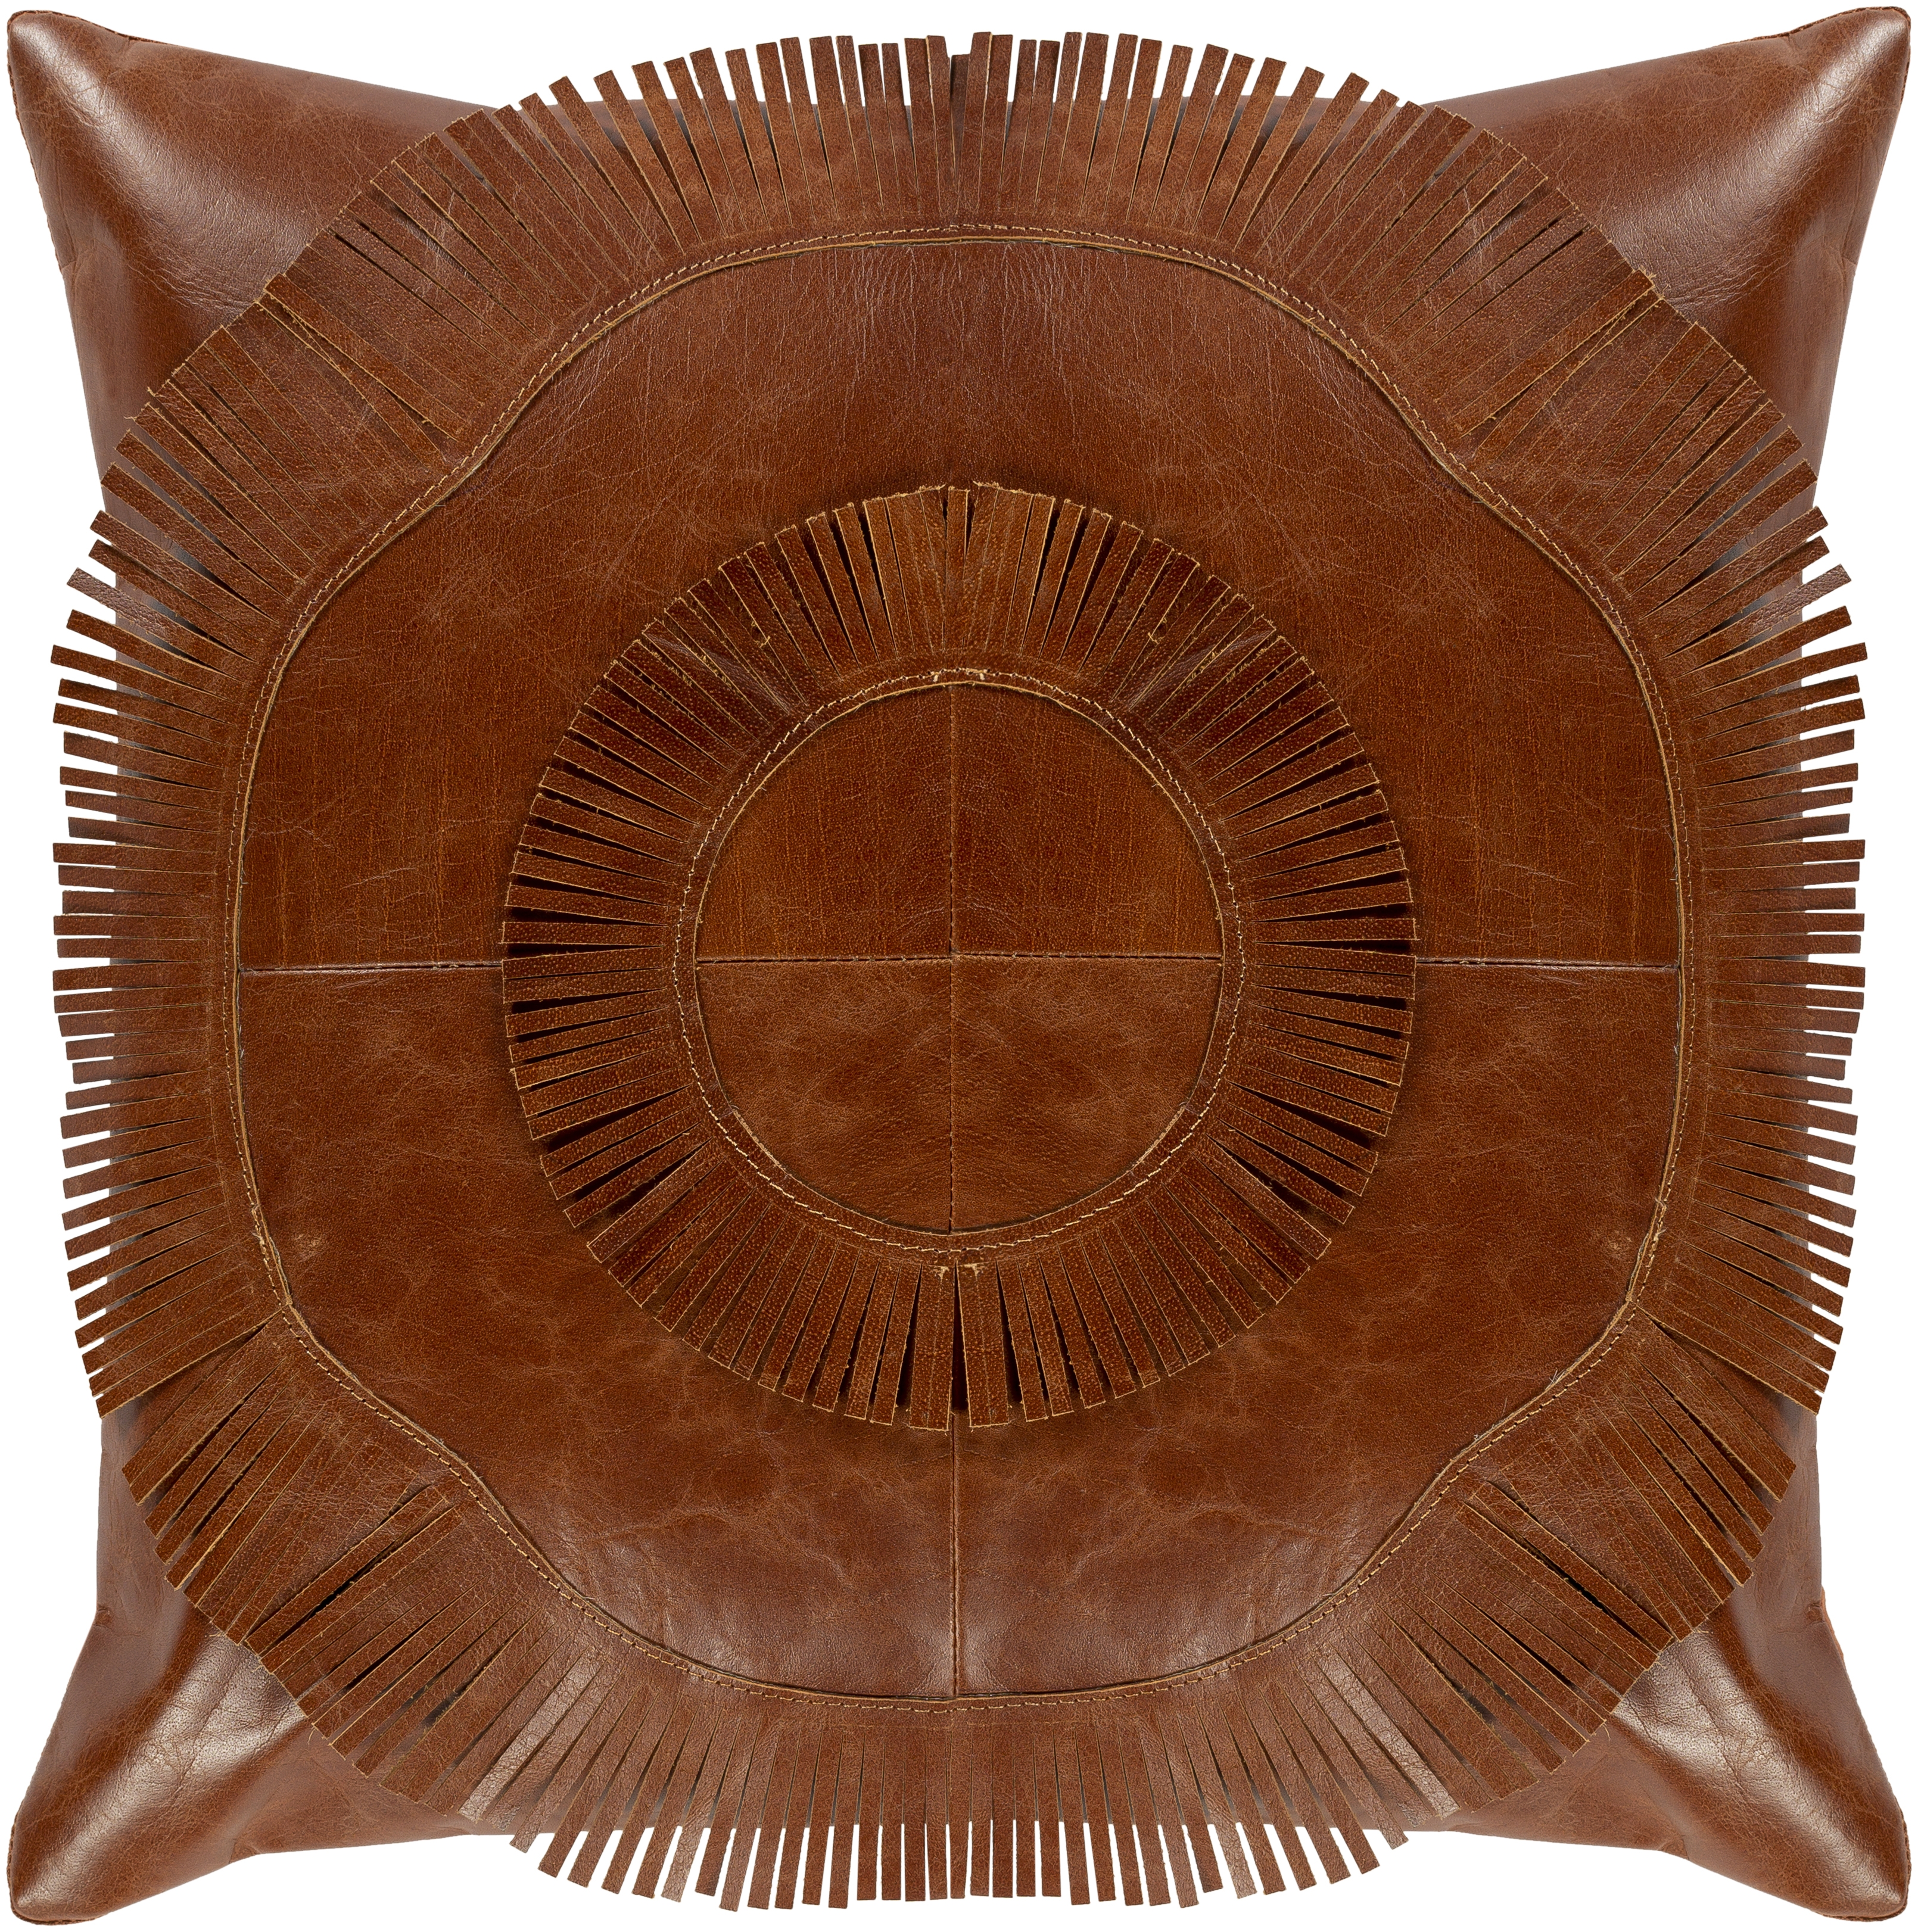 Mesquite Throw Pillow, 18" x 18", pillow cover only - Image 0